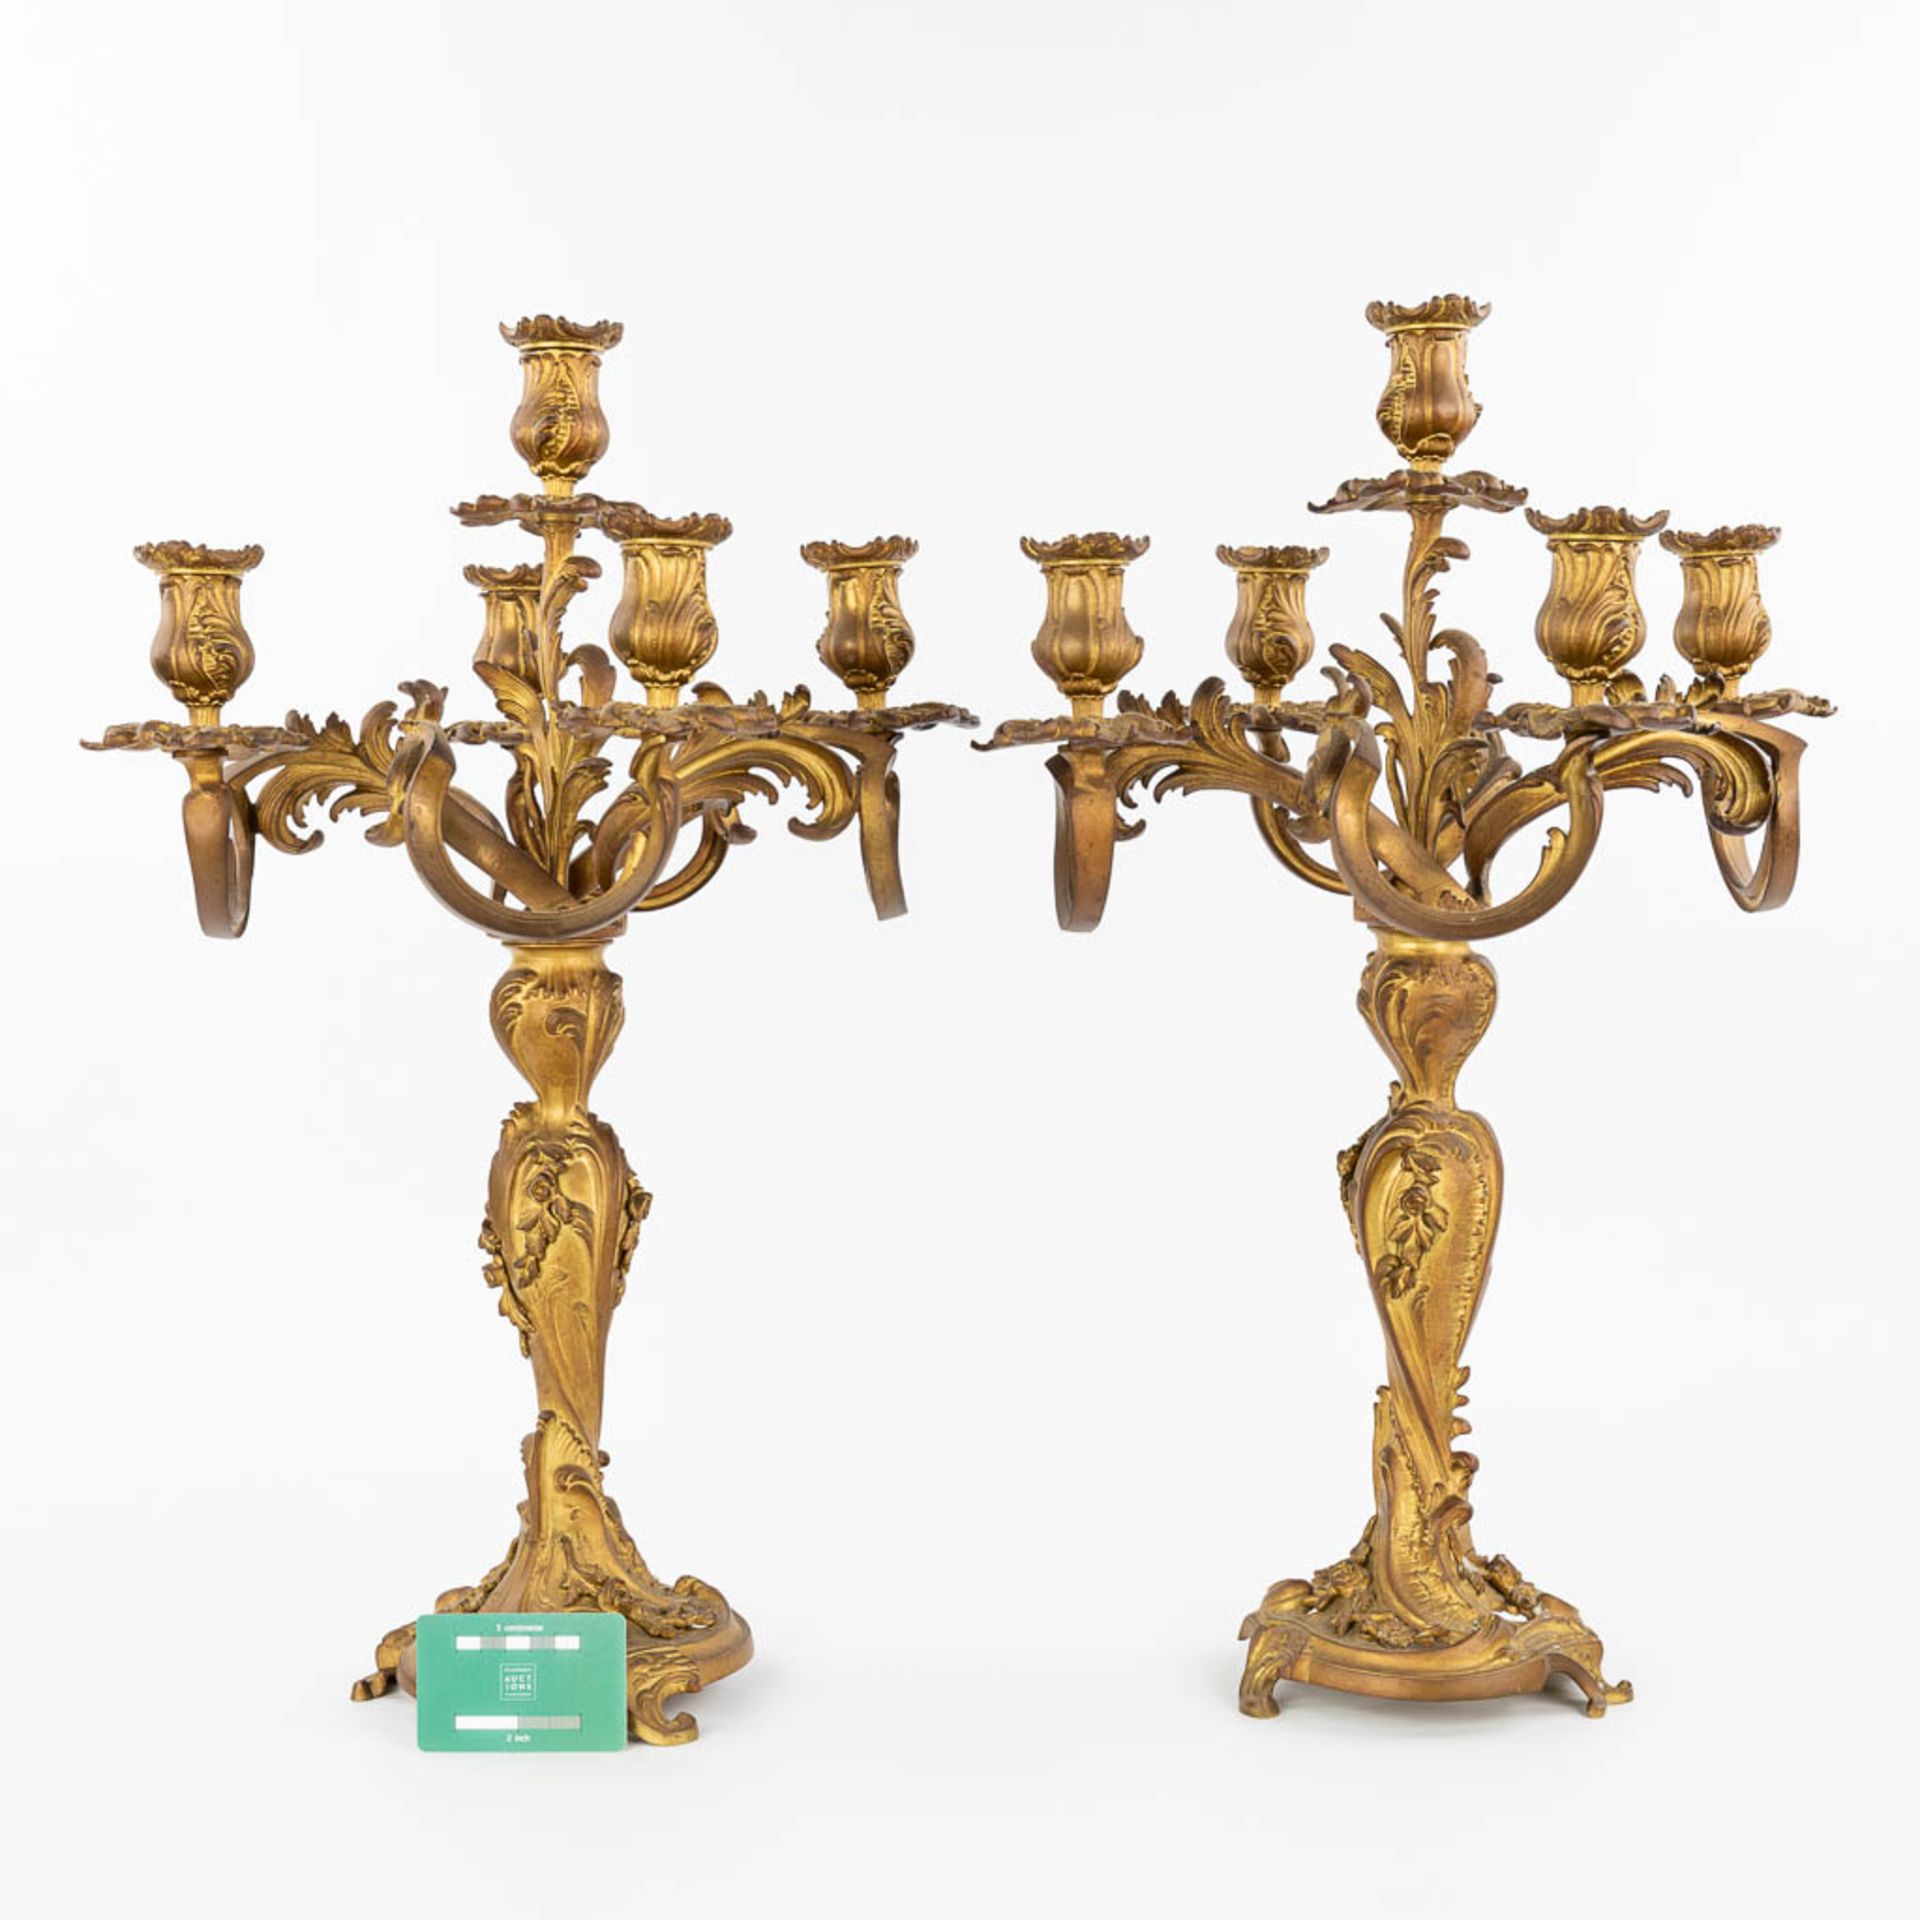 A pair of candelabra made of gilt bronze in Rococo style. (H:58cm) - Image 2 of 10